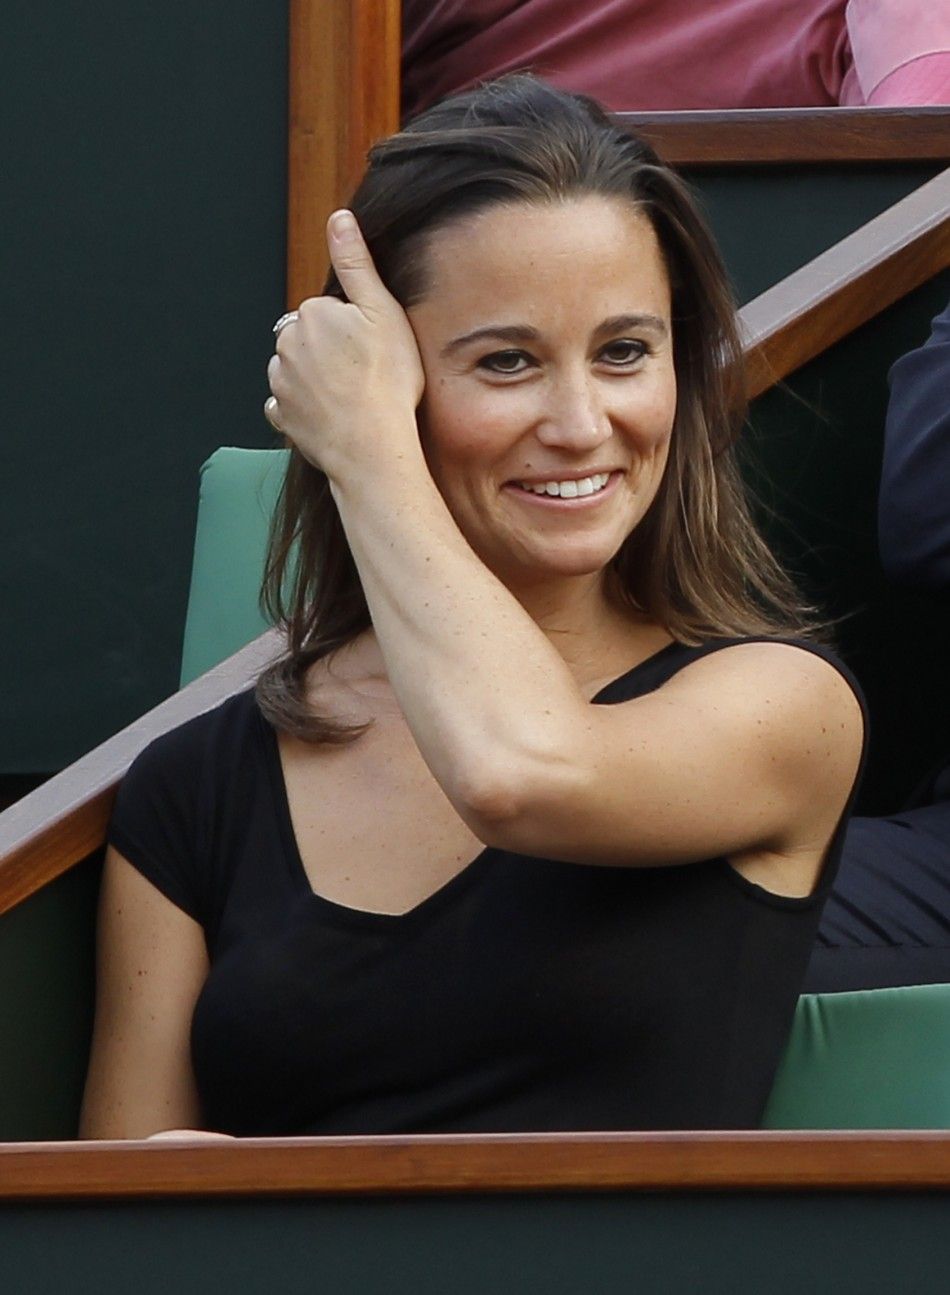  Pippa Middleton watches a match during the French Open tennis tournament at the Roland Garros stadium in Paris